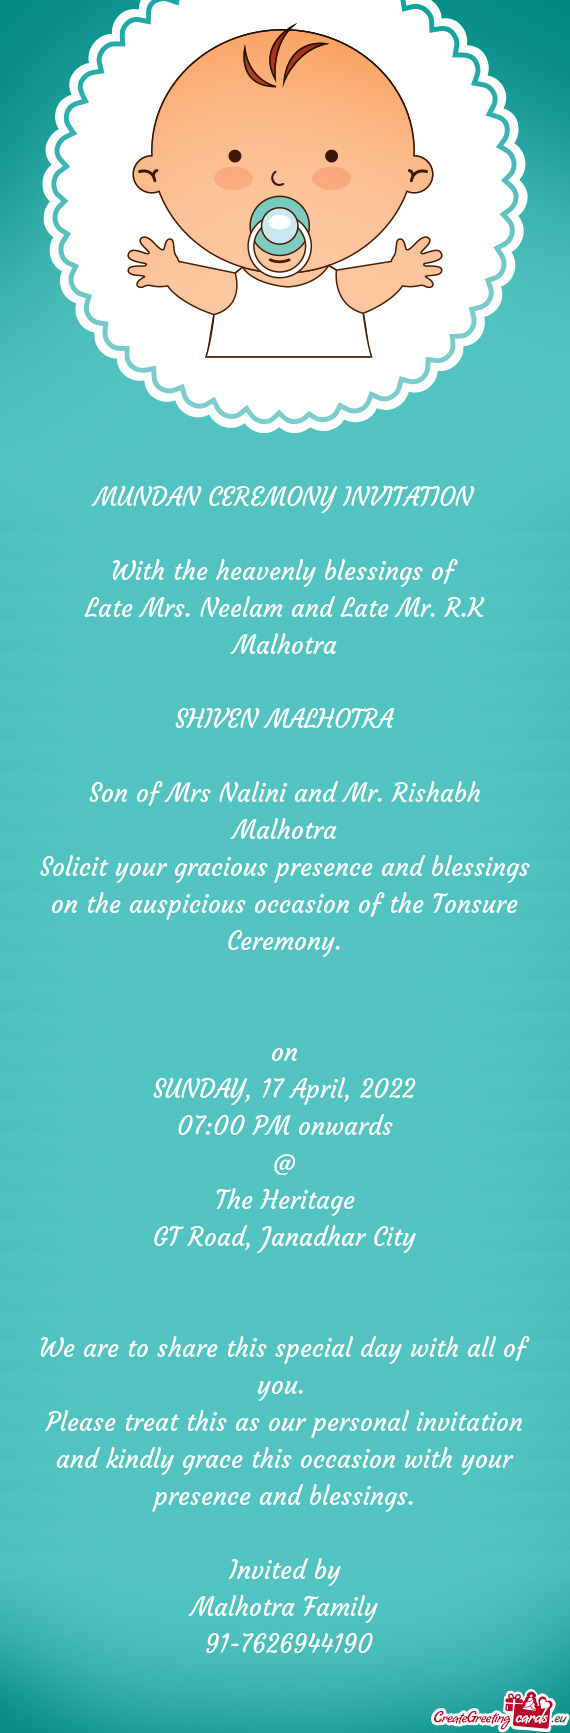 Solicit your gracious presence and blessings on the auspicious occasion of the Tonsure Ceremony